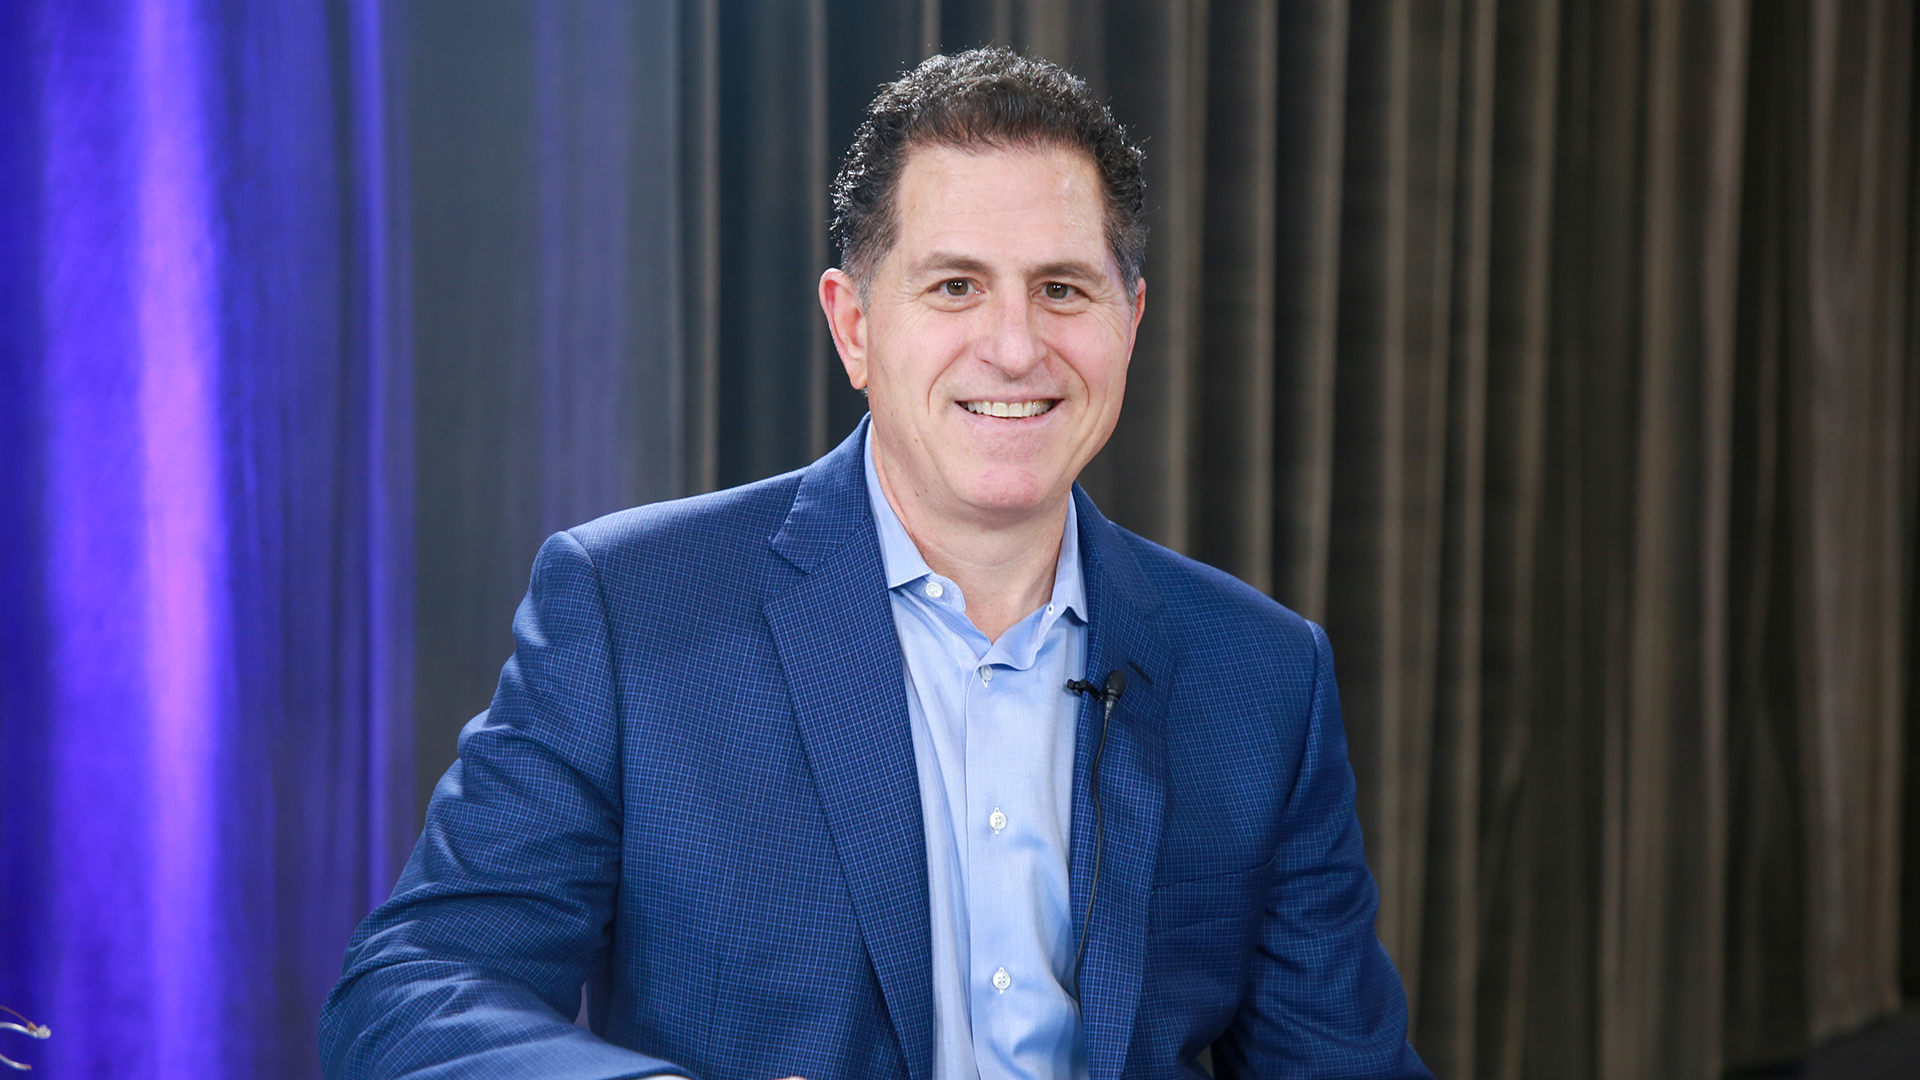 Michael Dell outlines vision for data, edge, APEX and the intelligent connected future